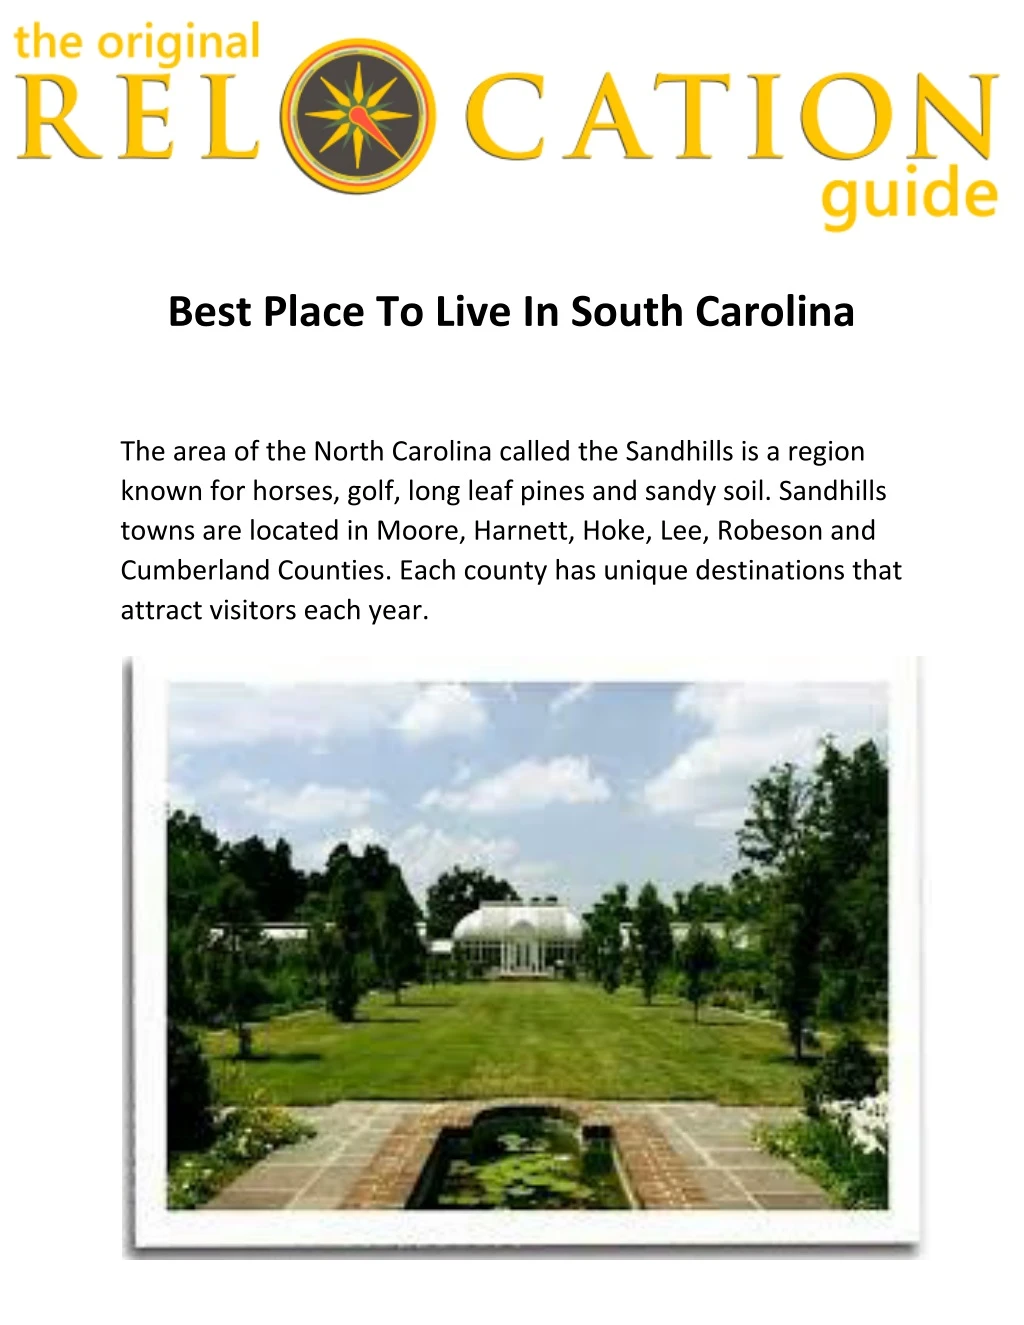 best place to live in south carolina